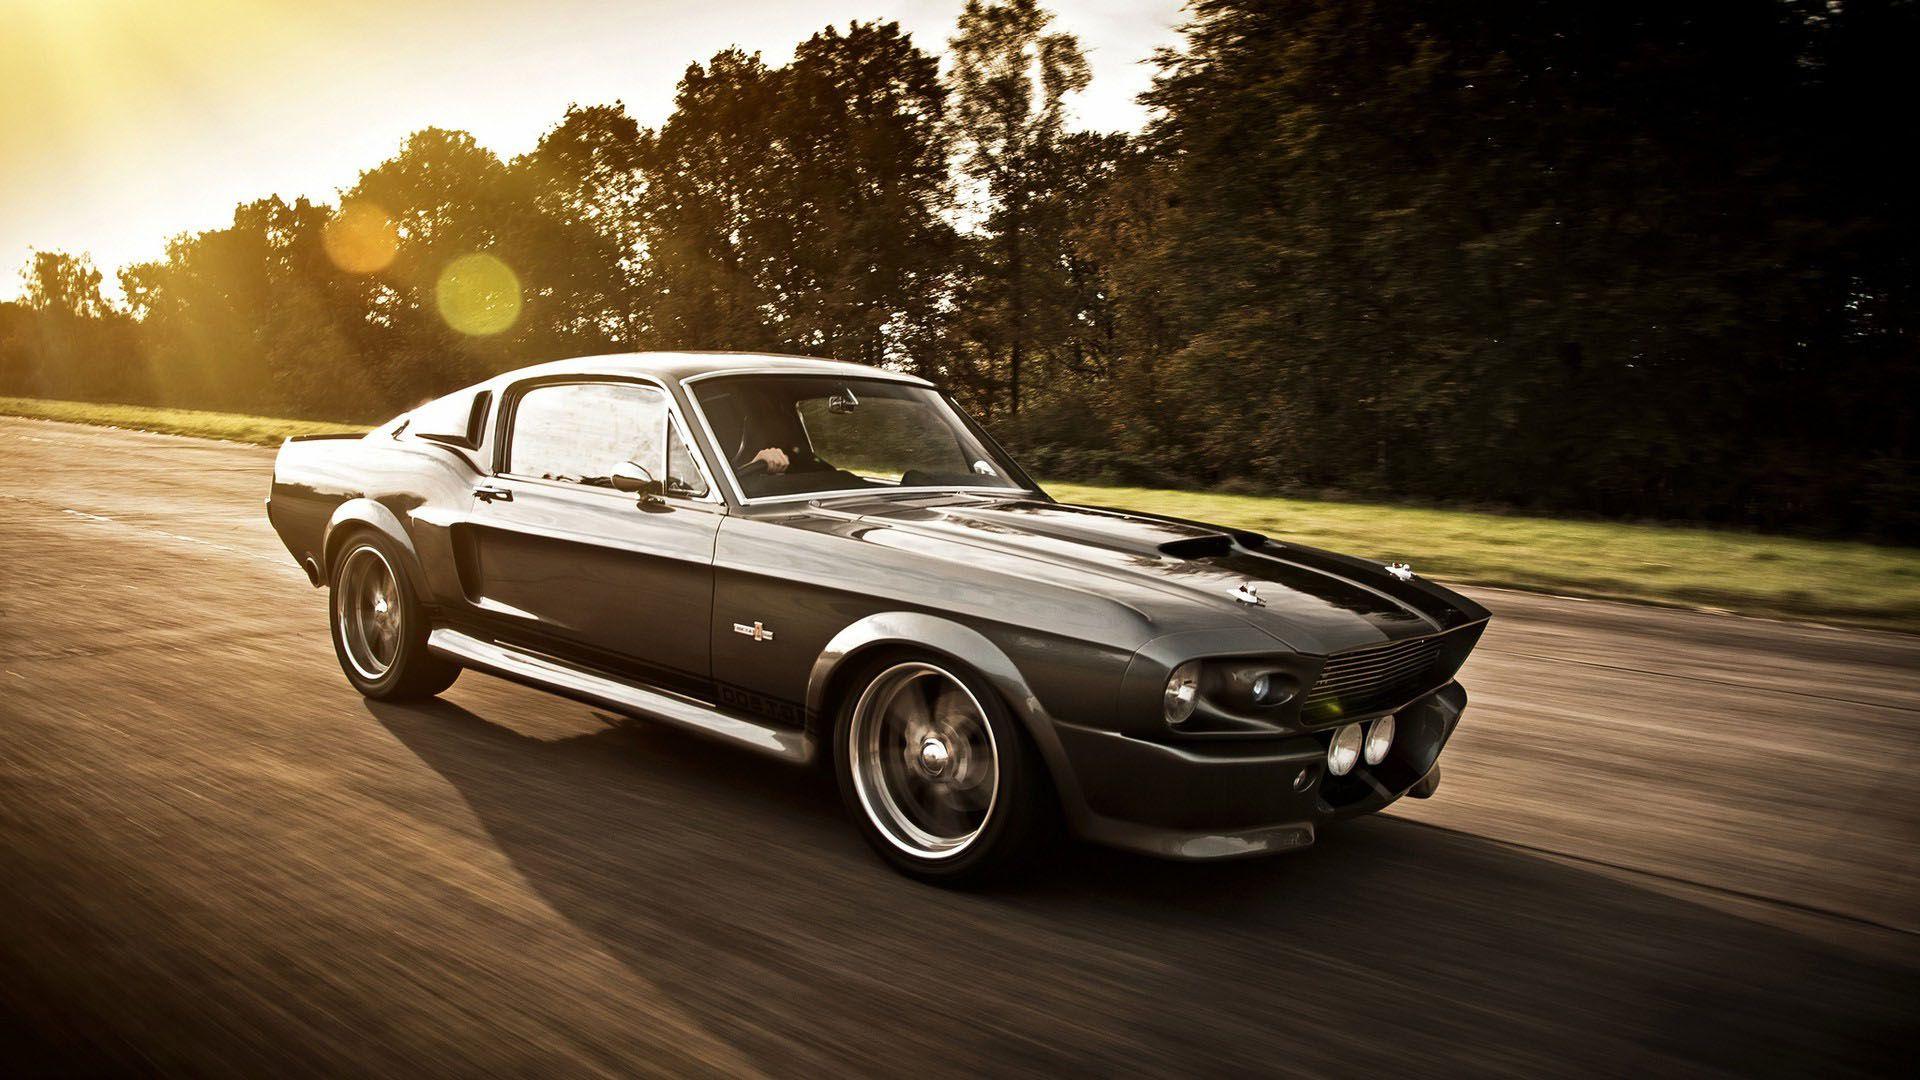 Download Classic Ford Mustang Wallpaper HD. All About Gallery Car